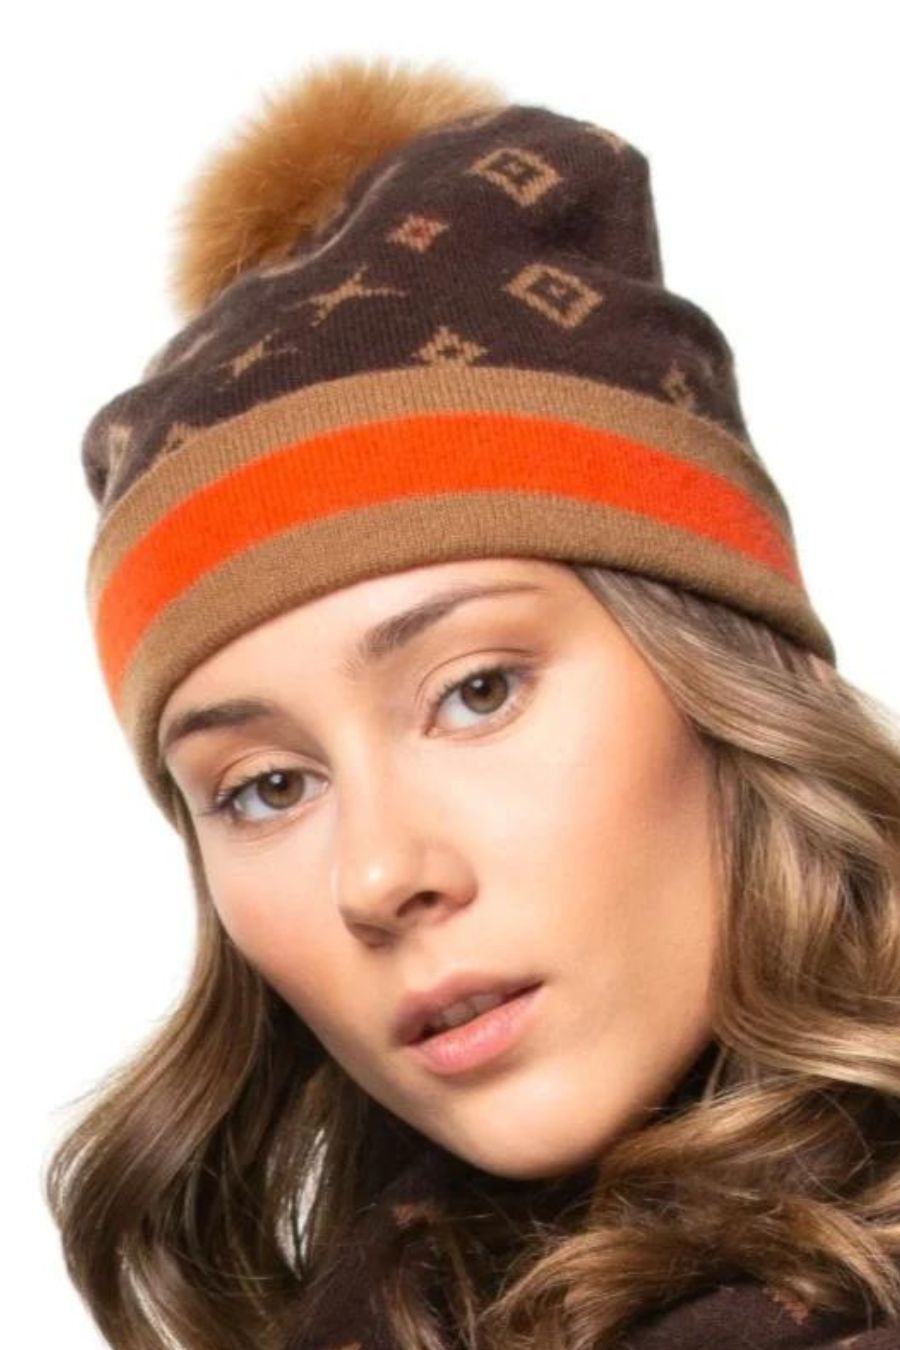 Monogram Pattern Hat with Contrasting Border